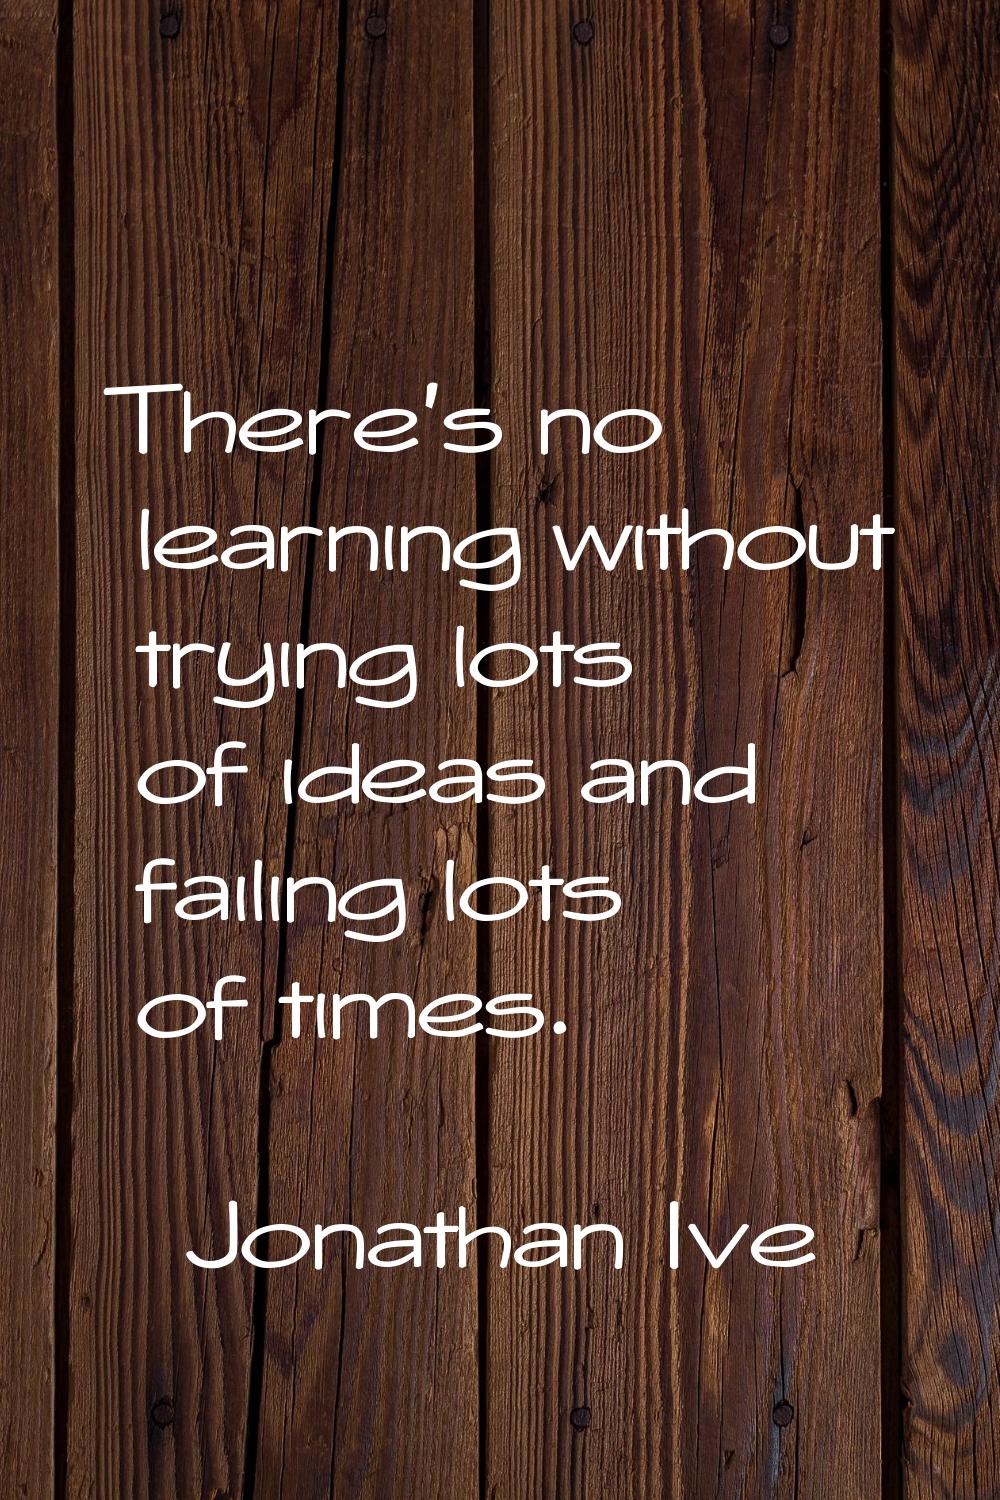 There's no learning without trying lots of ideas and failing lots of times.